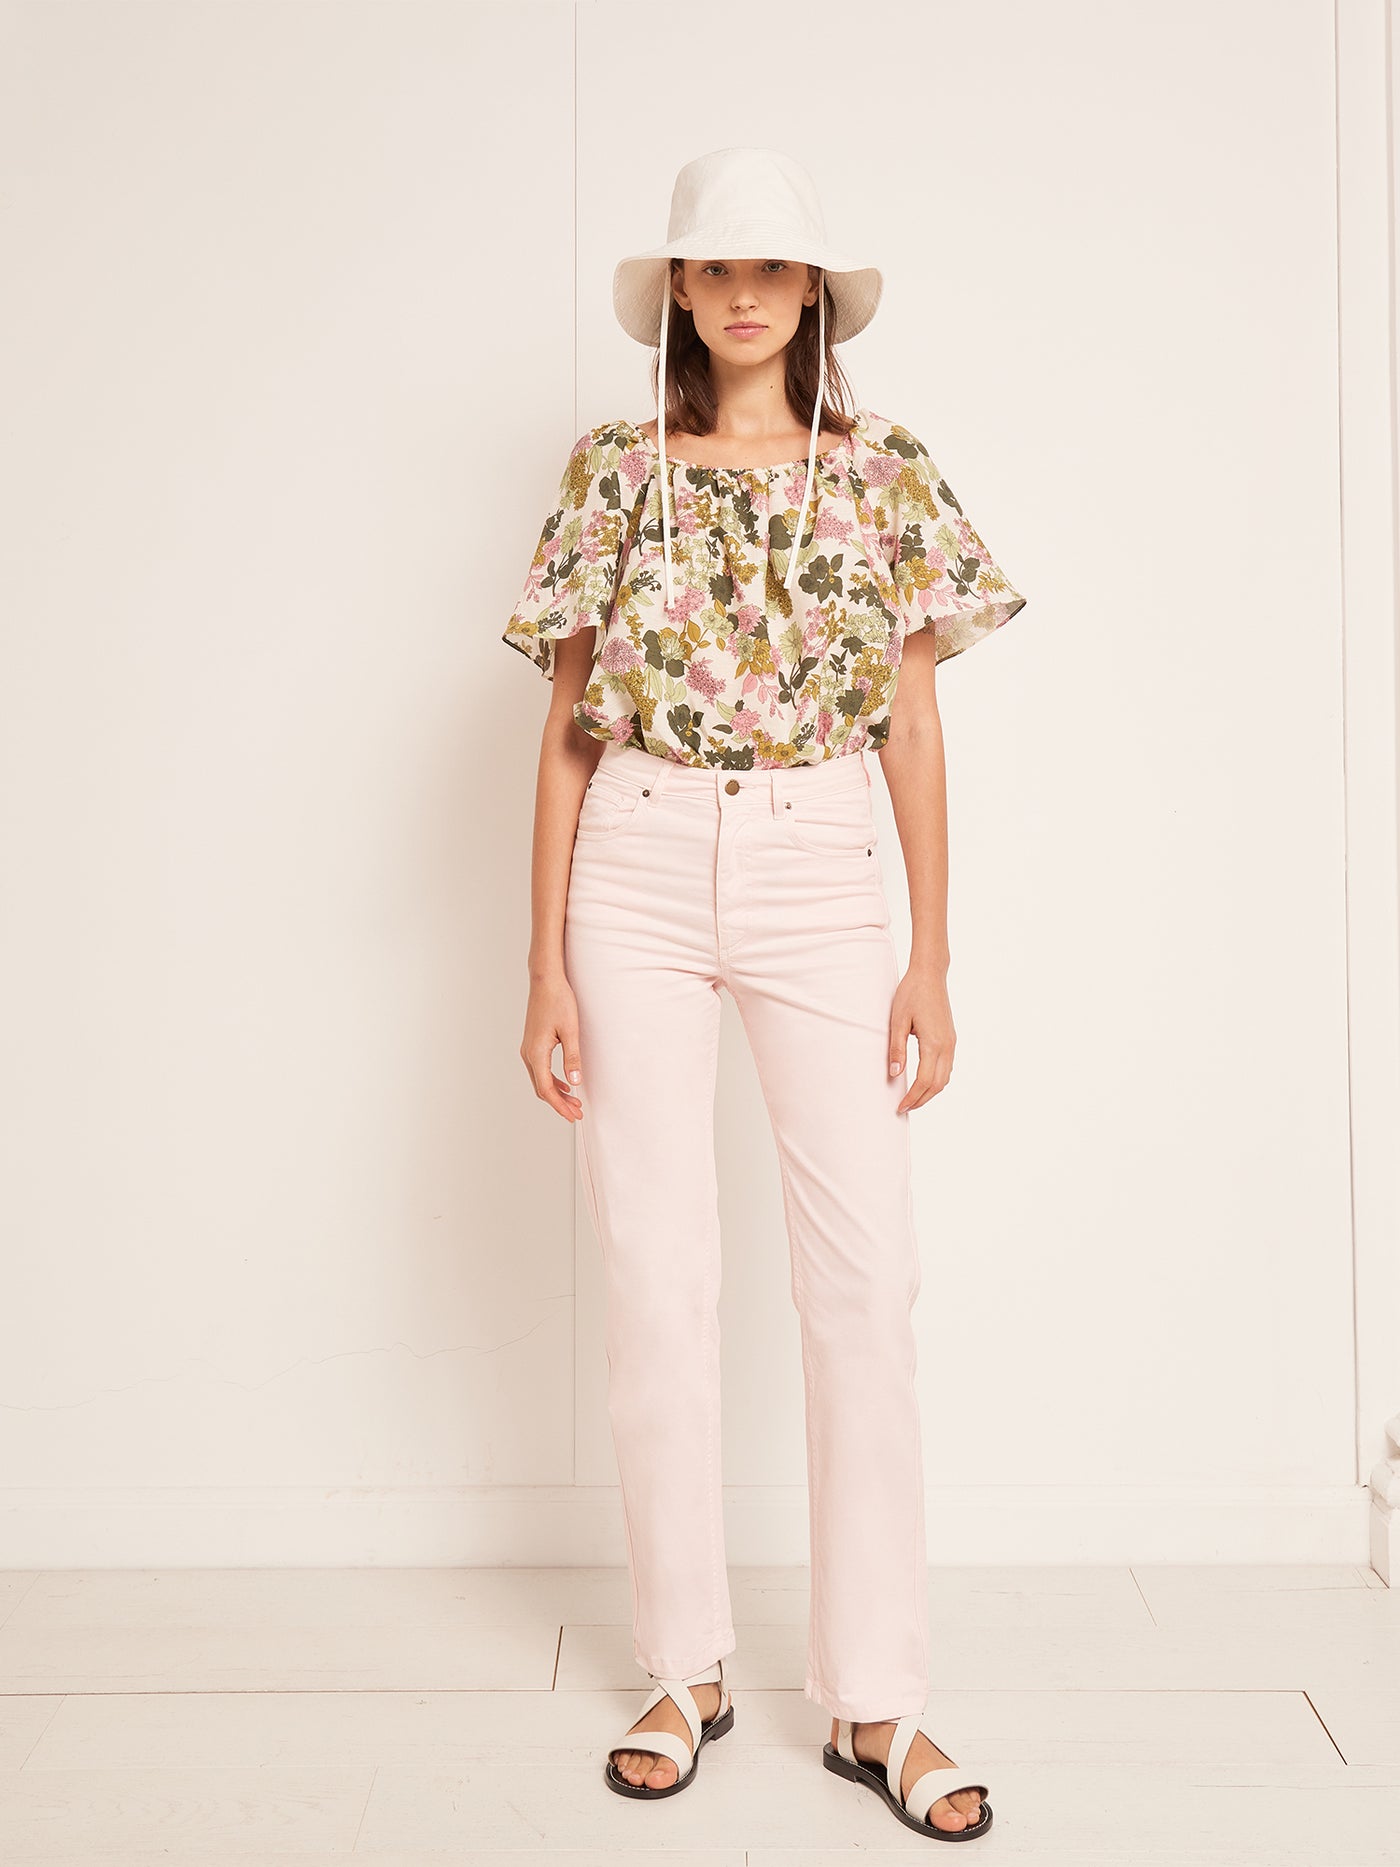 SUMMER 2023 WOMAN'S LOOK FLOWERED BLOUSE